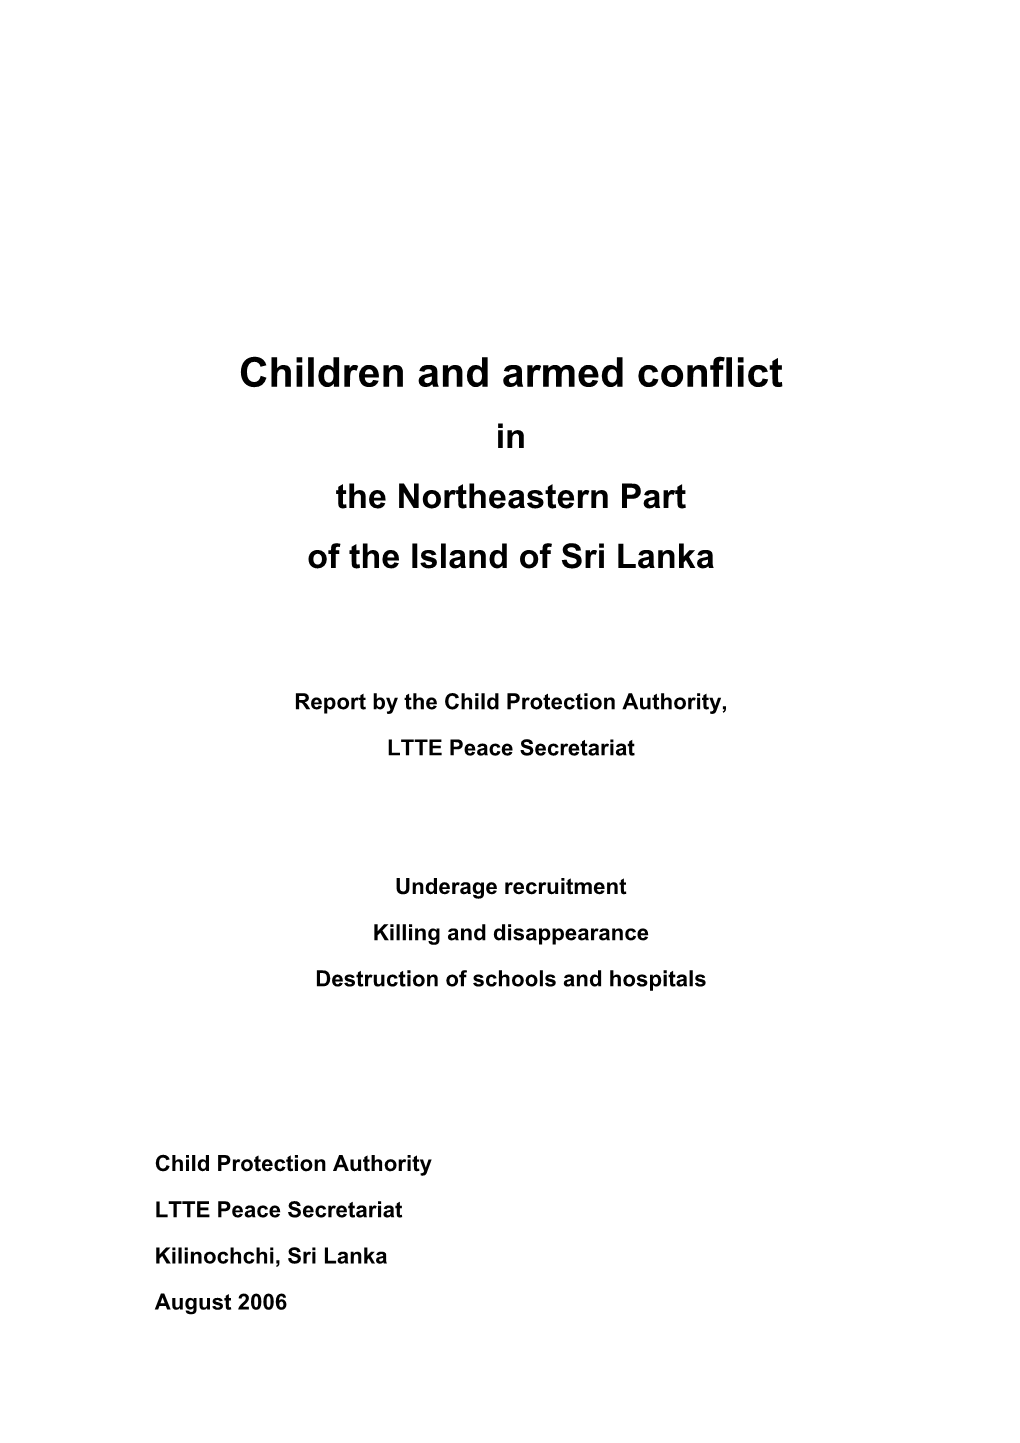 Children and Armed Conflict in the Northeastern Part of the Island of Sri Lanka